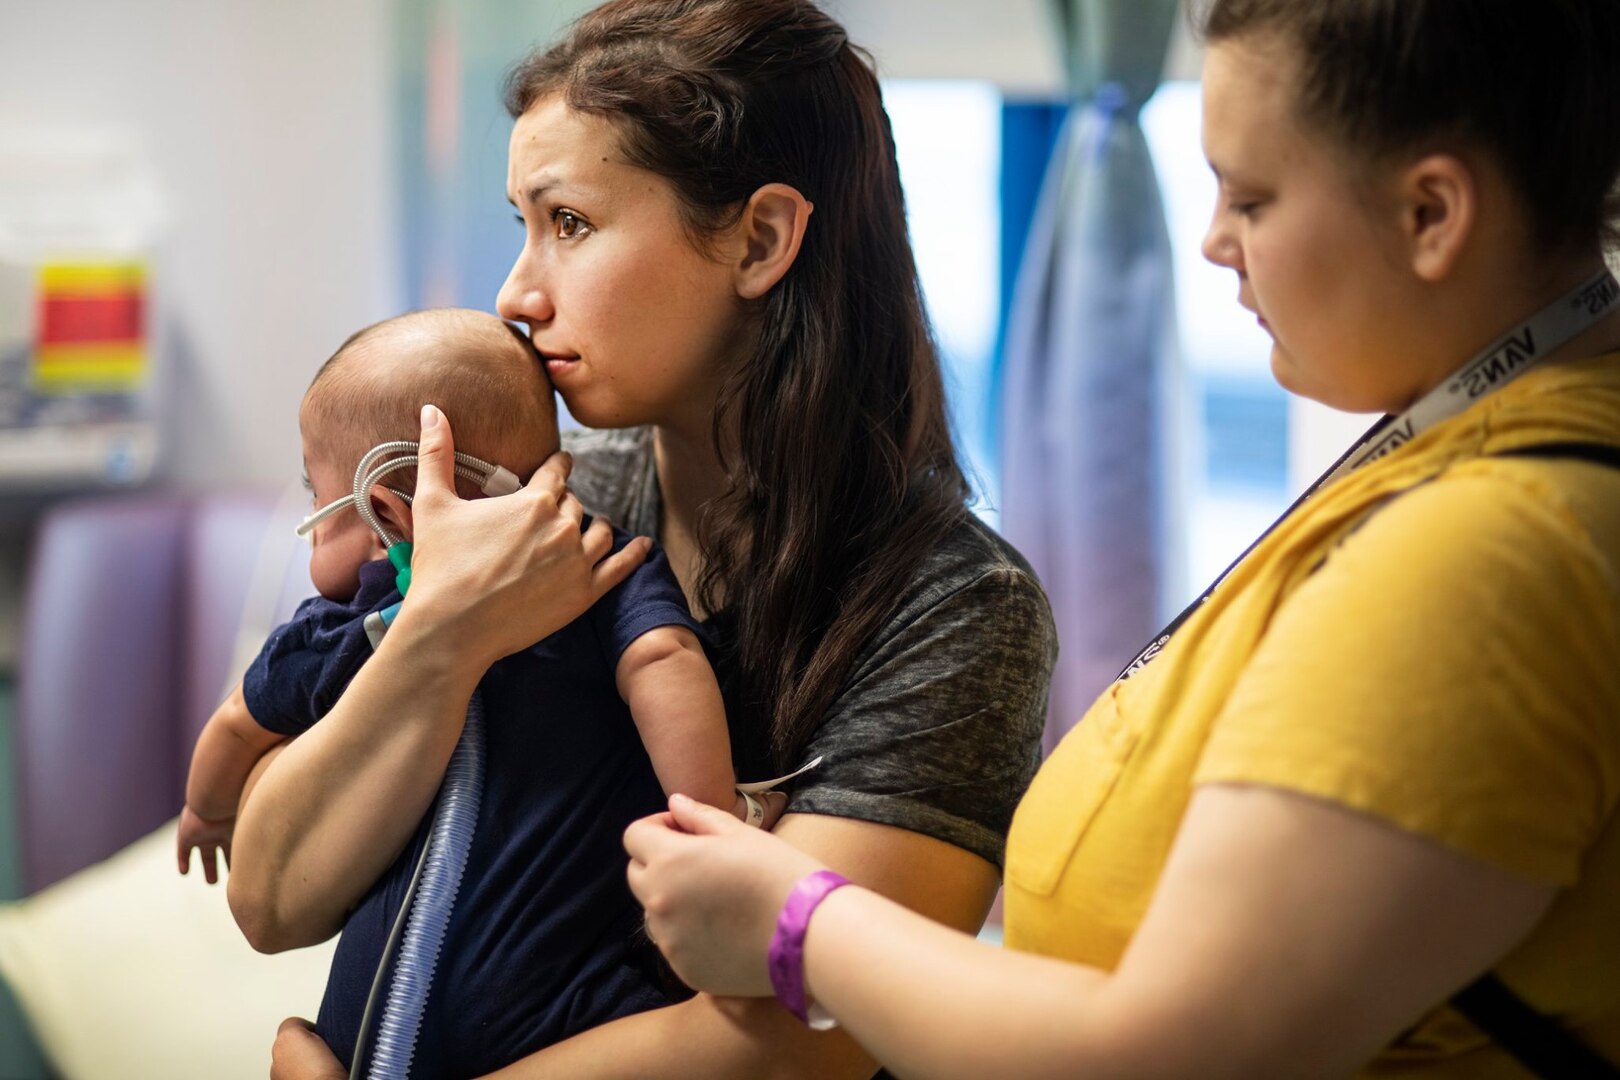 Kaitlyn Crawford holds her 7-month-old son, Nakoa, at the Children’s Medical Center of Dallas, June 7, 2019. Critical air transport team members explained the process of transferring her son to the Balboa Naval Medical Center in San Diego via C-130 Hercules.